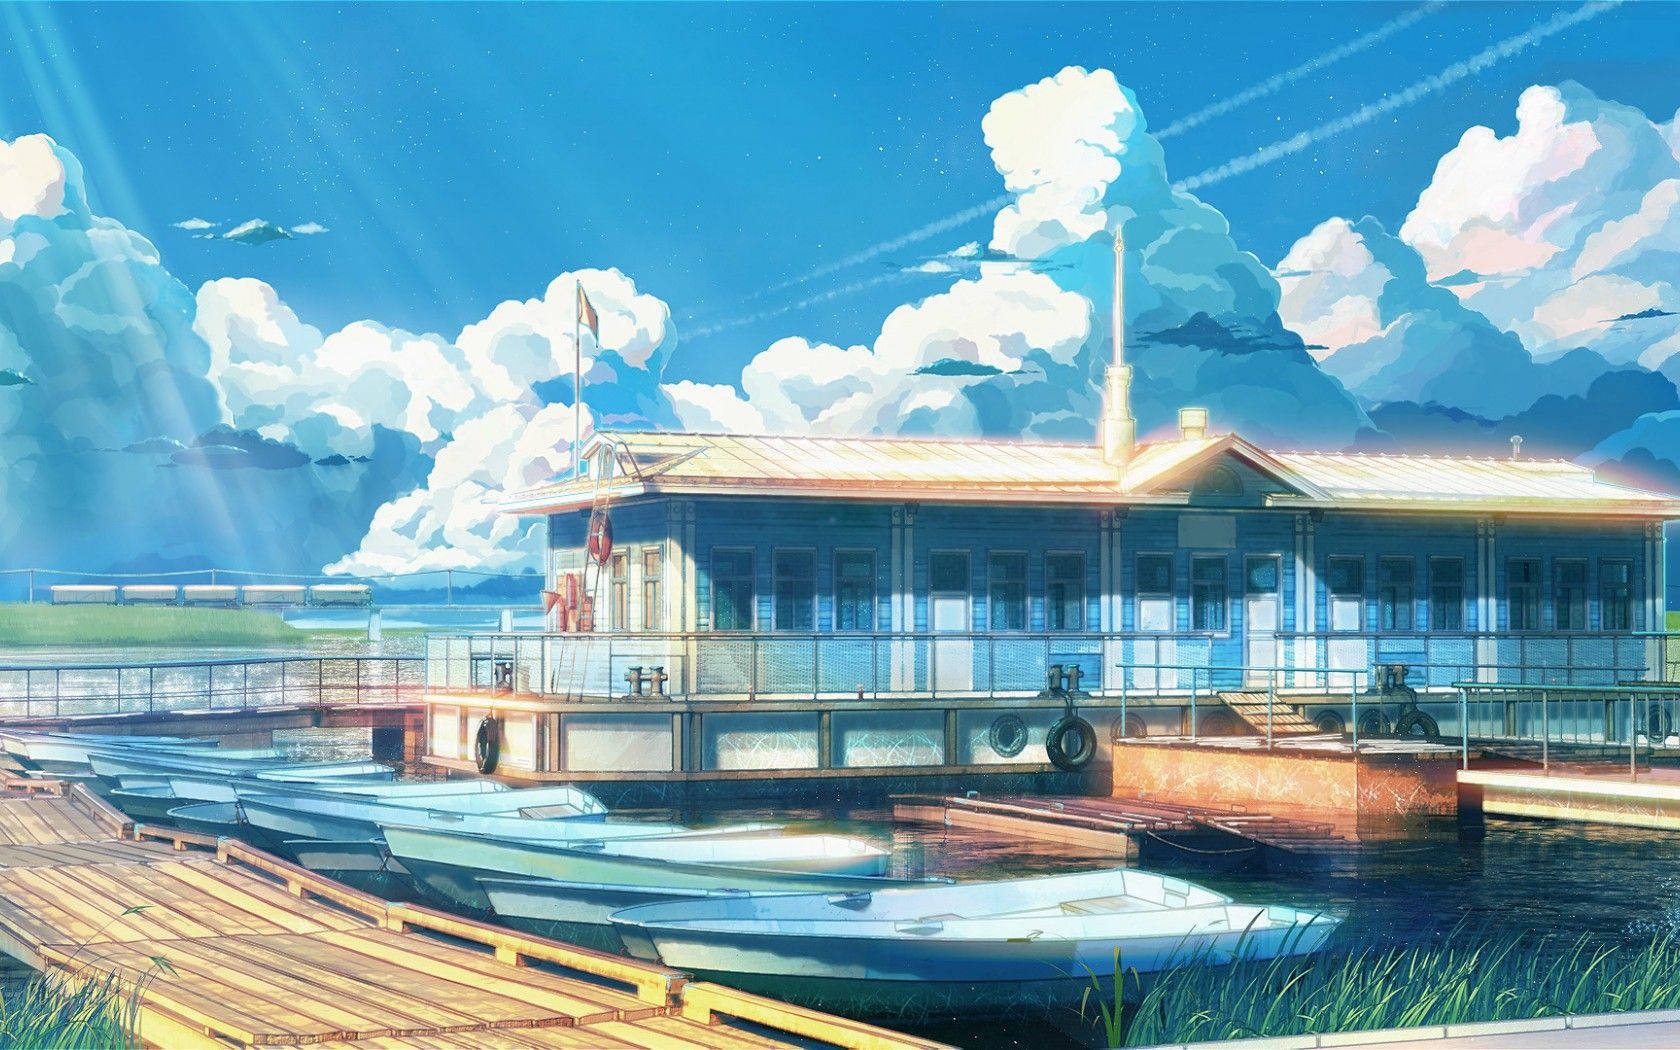 Anime Scenery Wallpaper & Background For FREE